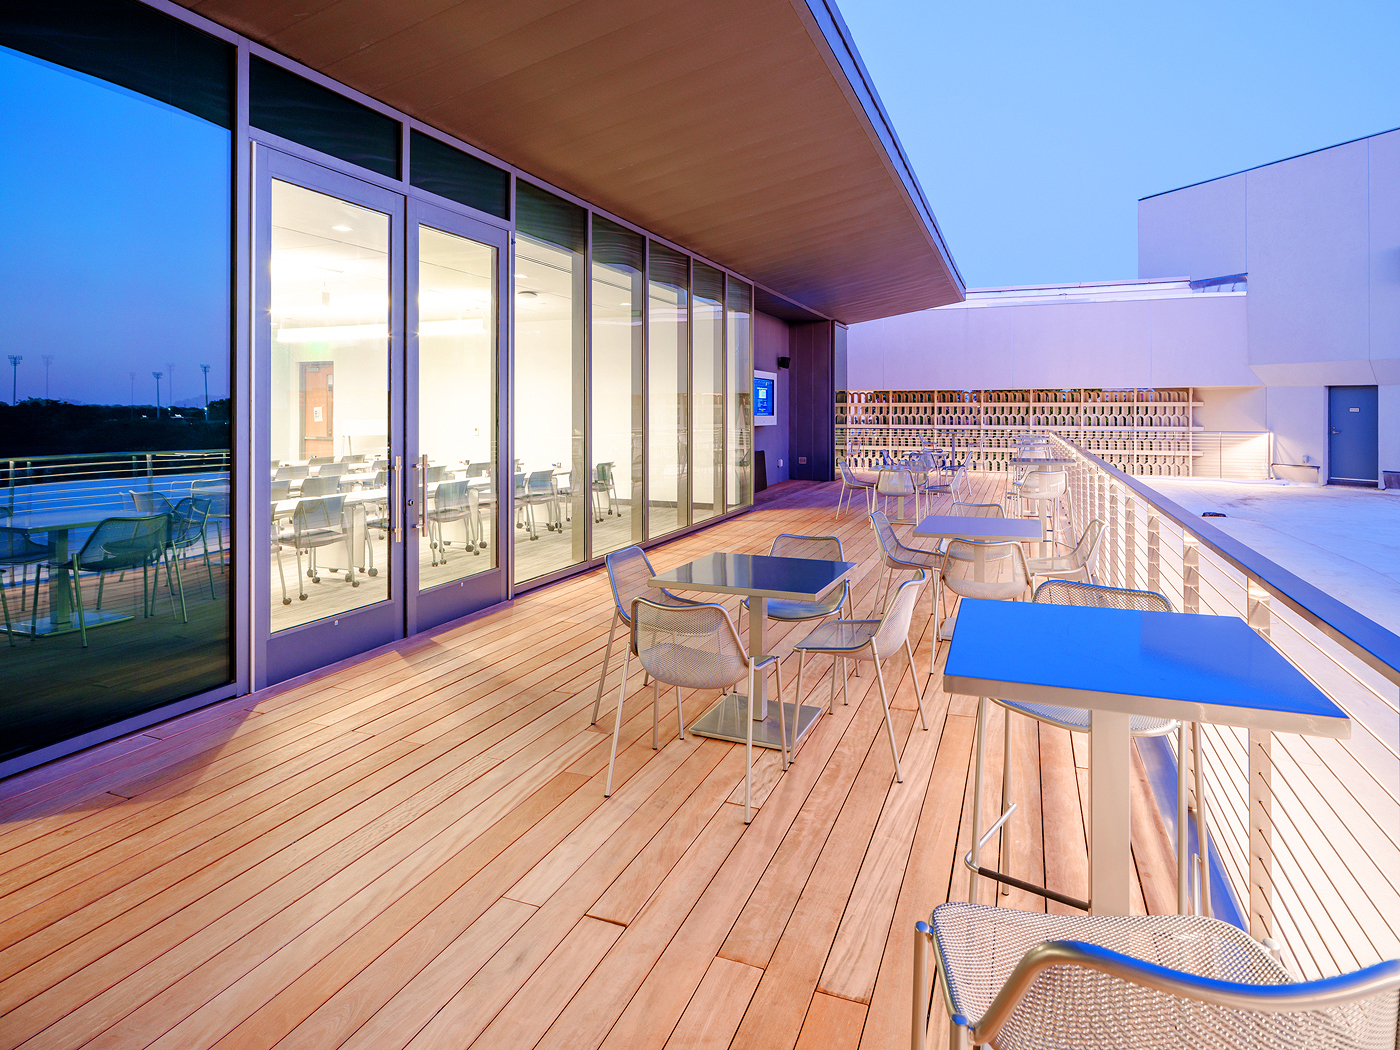 The rooftop terrace includes an AV alcove with 55" flat panel display and a sound system producing 200 watts of audio. From this angle, the flat panel display is visible at the far end of the terrace.